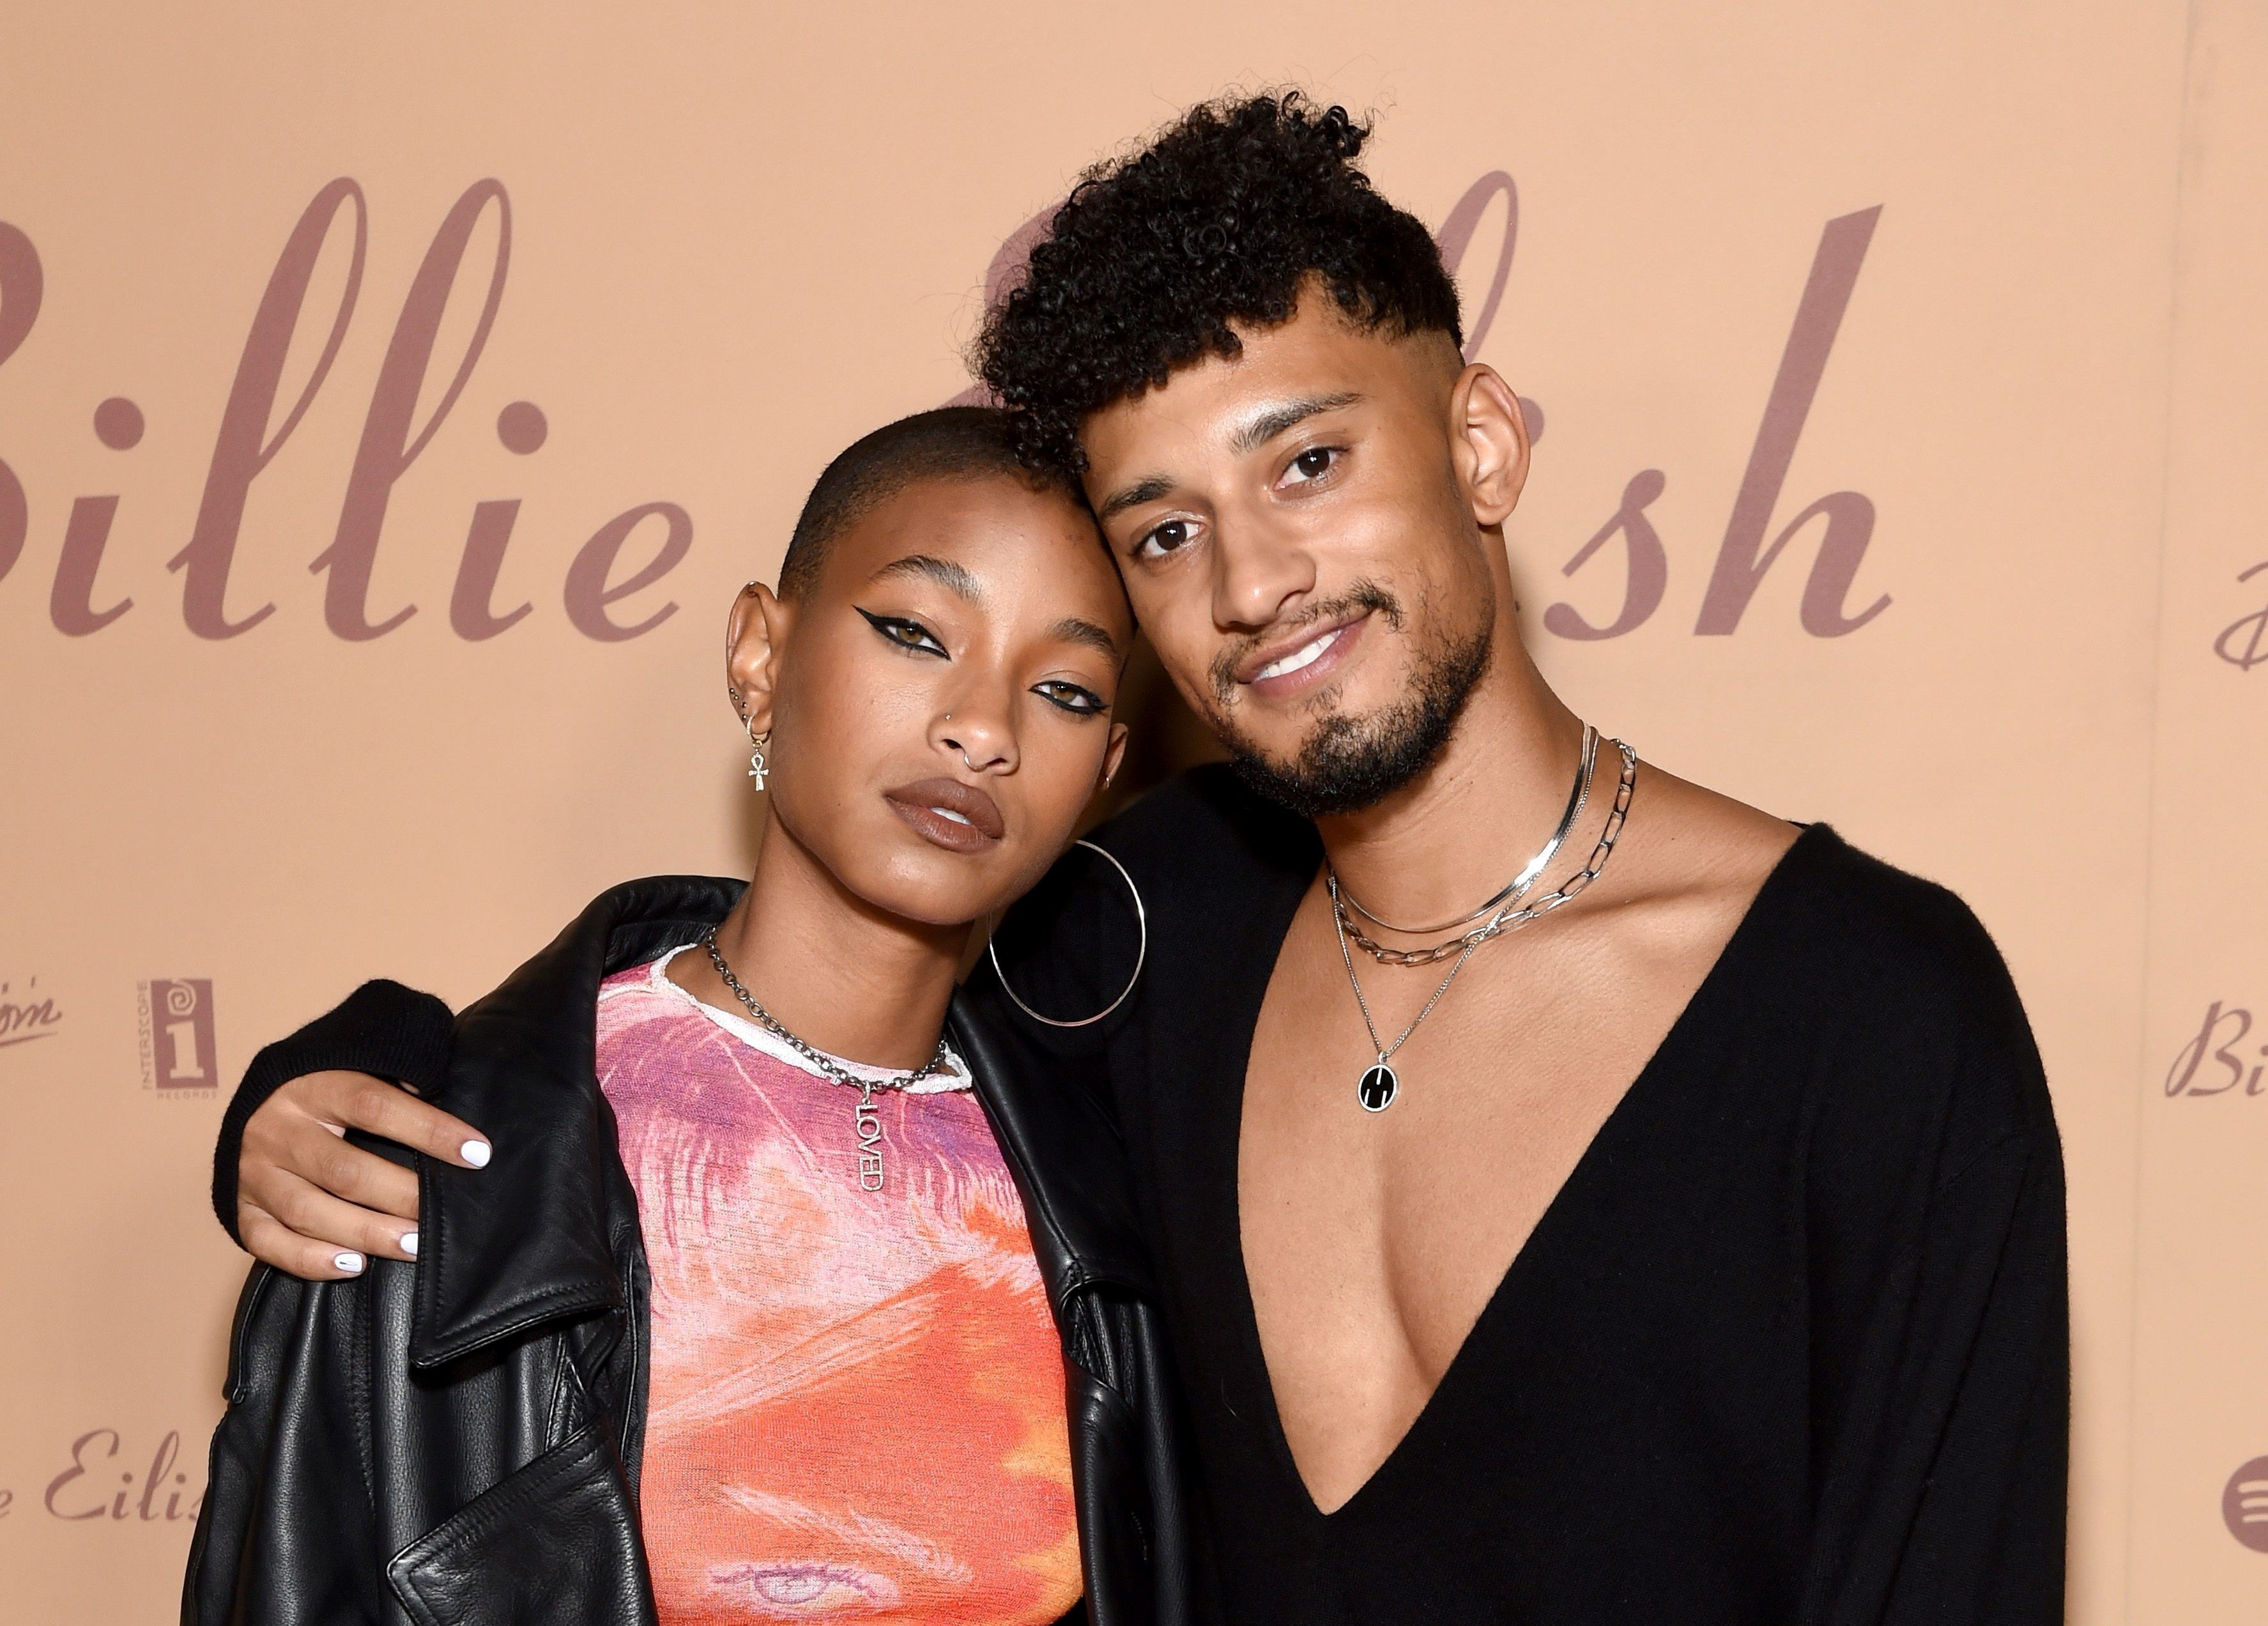 Willow Smith and Tyler Cole attend the "Happier Than Ever: The Destination" celebration, presented by Billie Eilish and Spotify, for the new album on July 29, 2021 in Los Angeles, California.| Getty Images 